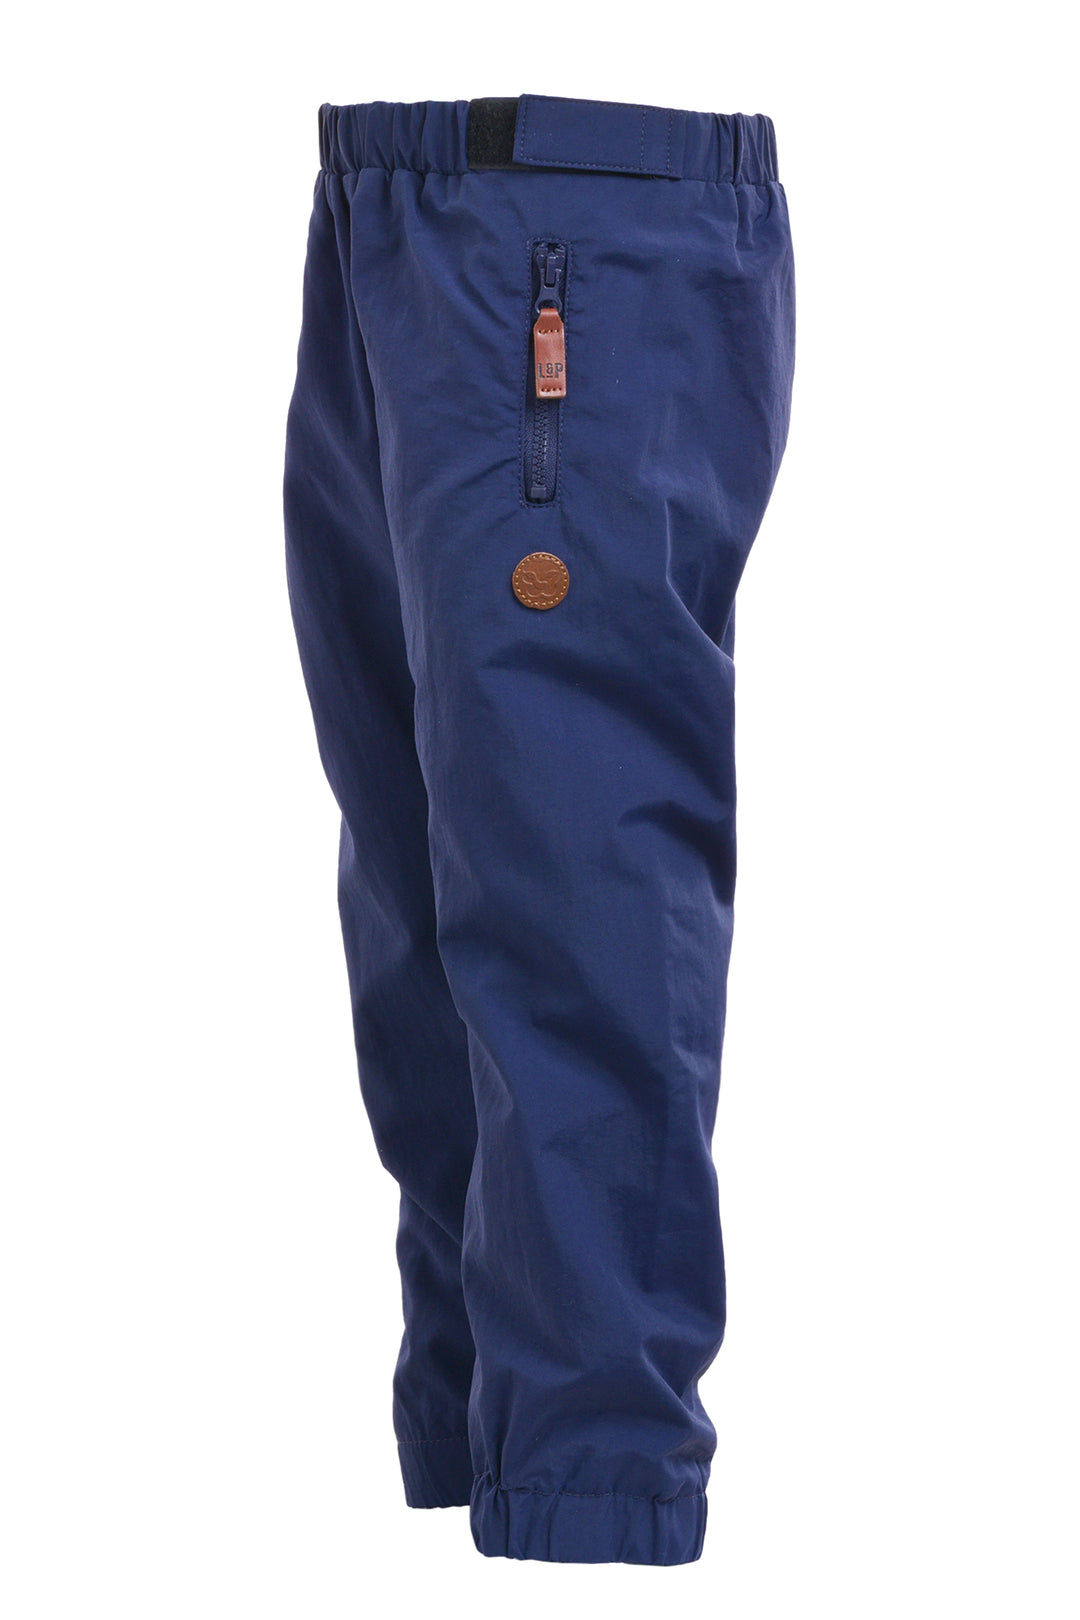 Cotton Lined Outdoor Pants [Baby]